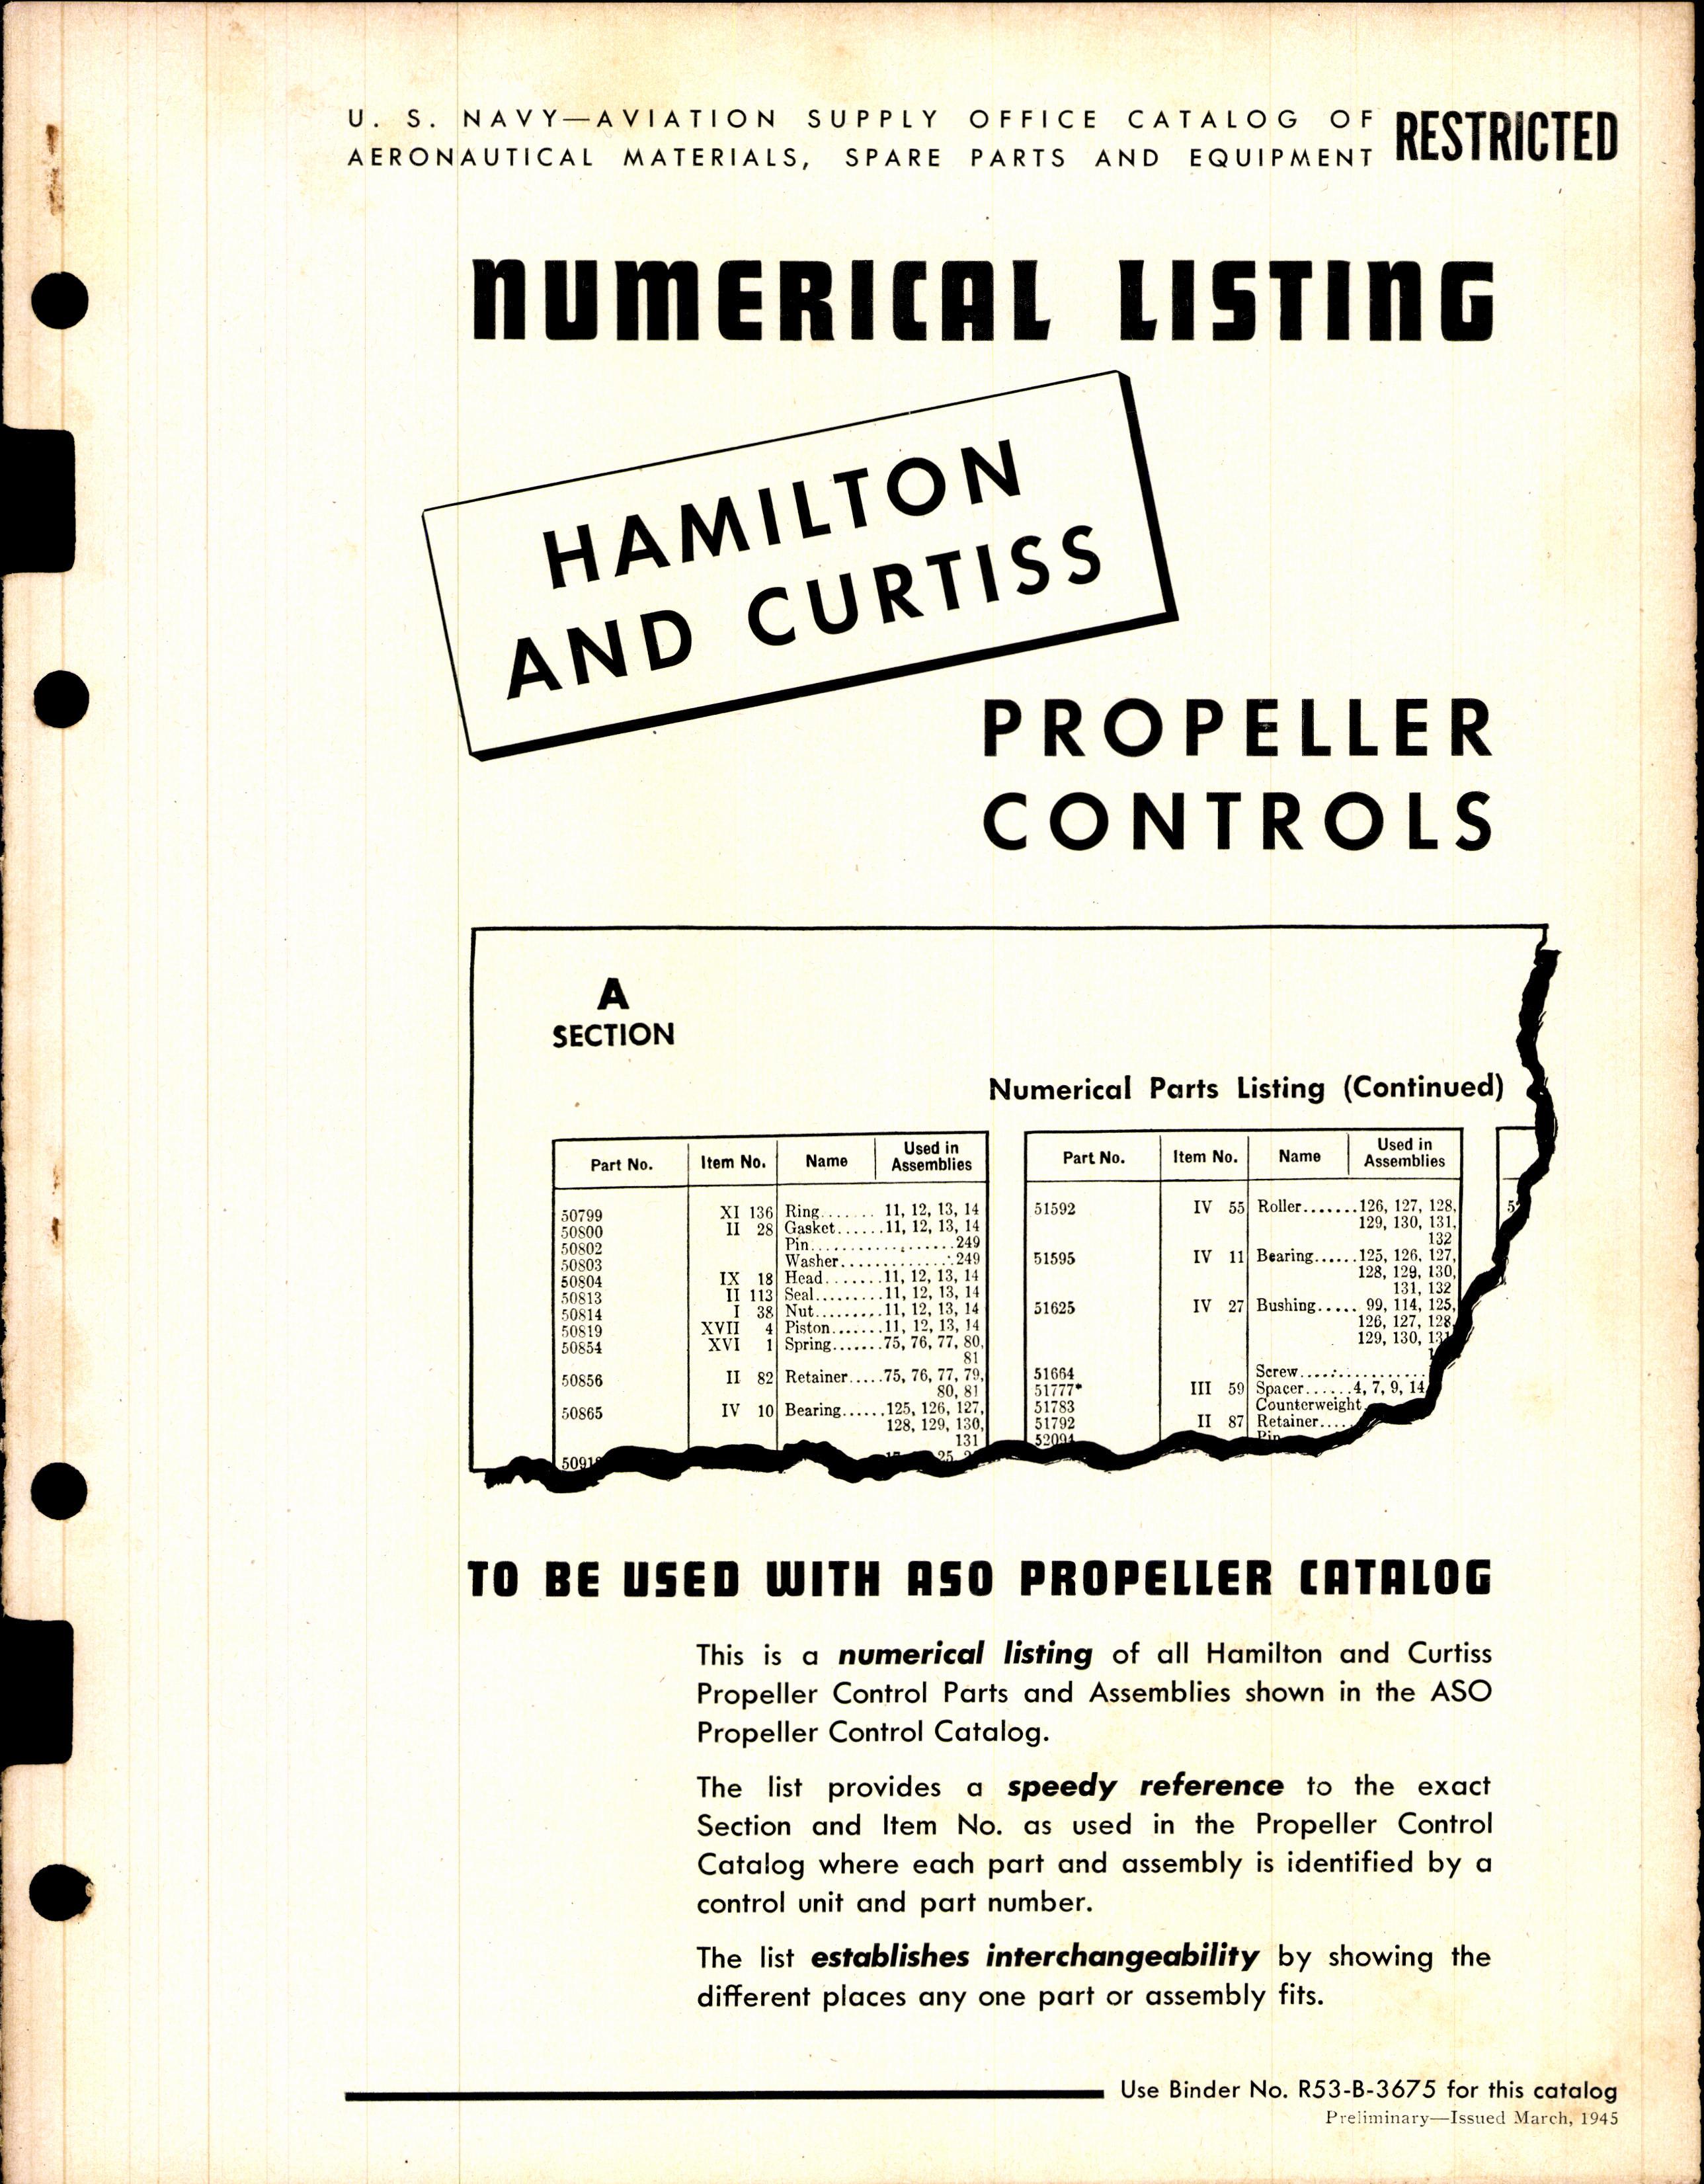 Sample page 1 from AirCorps Library document: Numerical Listing, Hamilton and Curtiss Propeller Controls